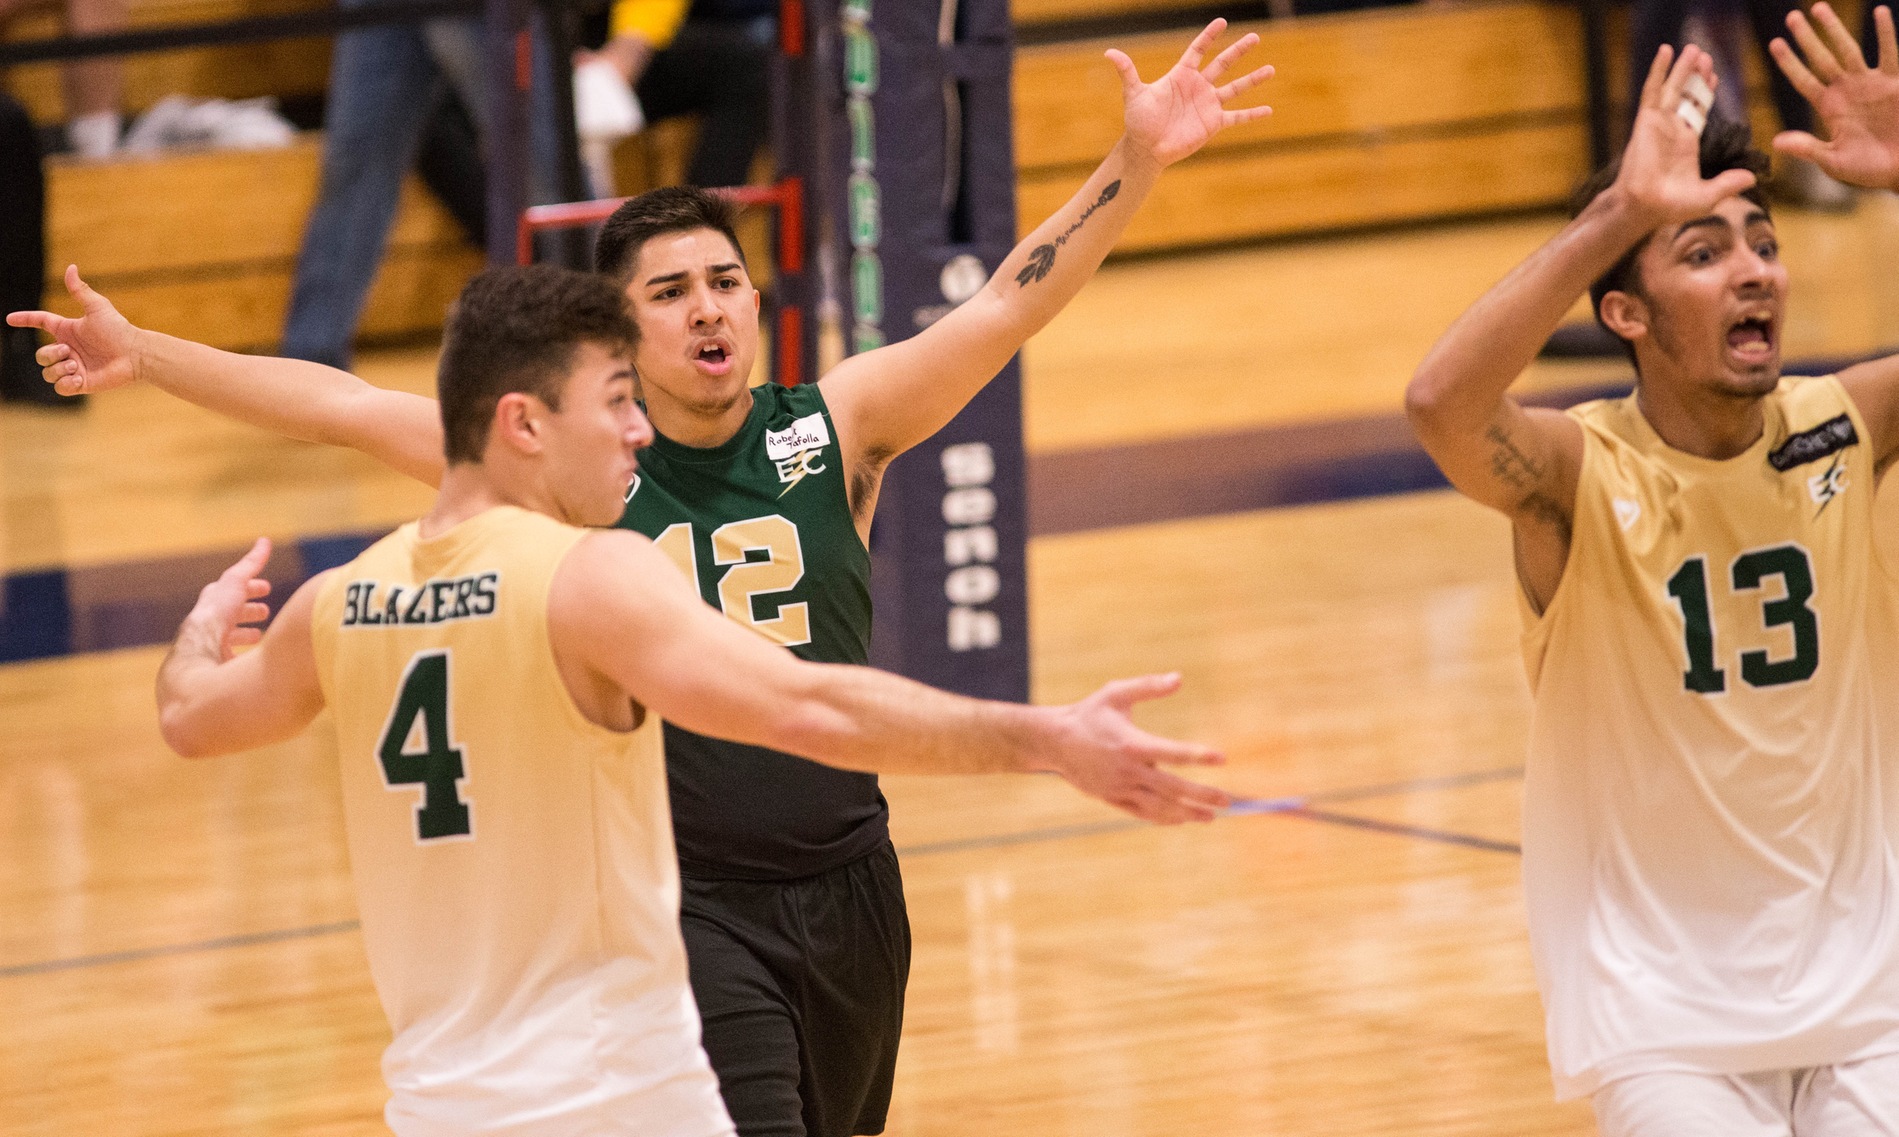 Blazer Volleyball Makes It Four Wins In A Row